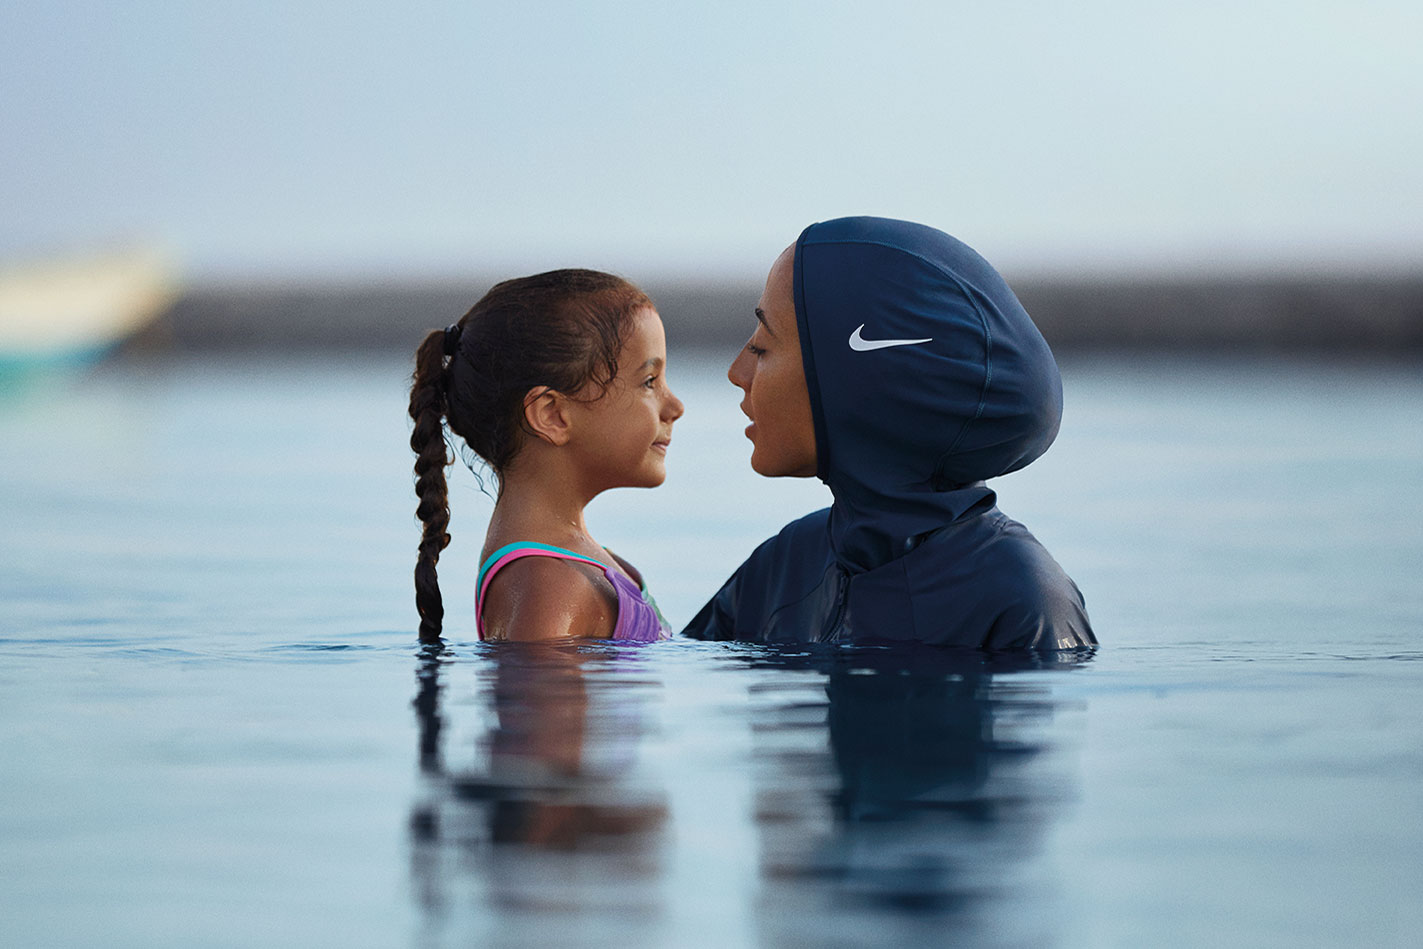 victory swim collection nike